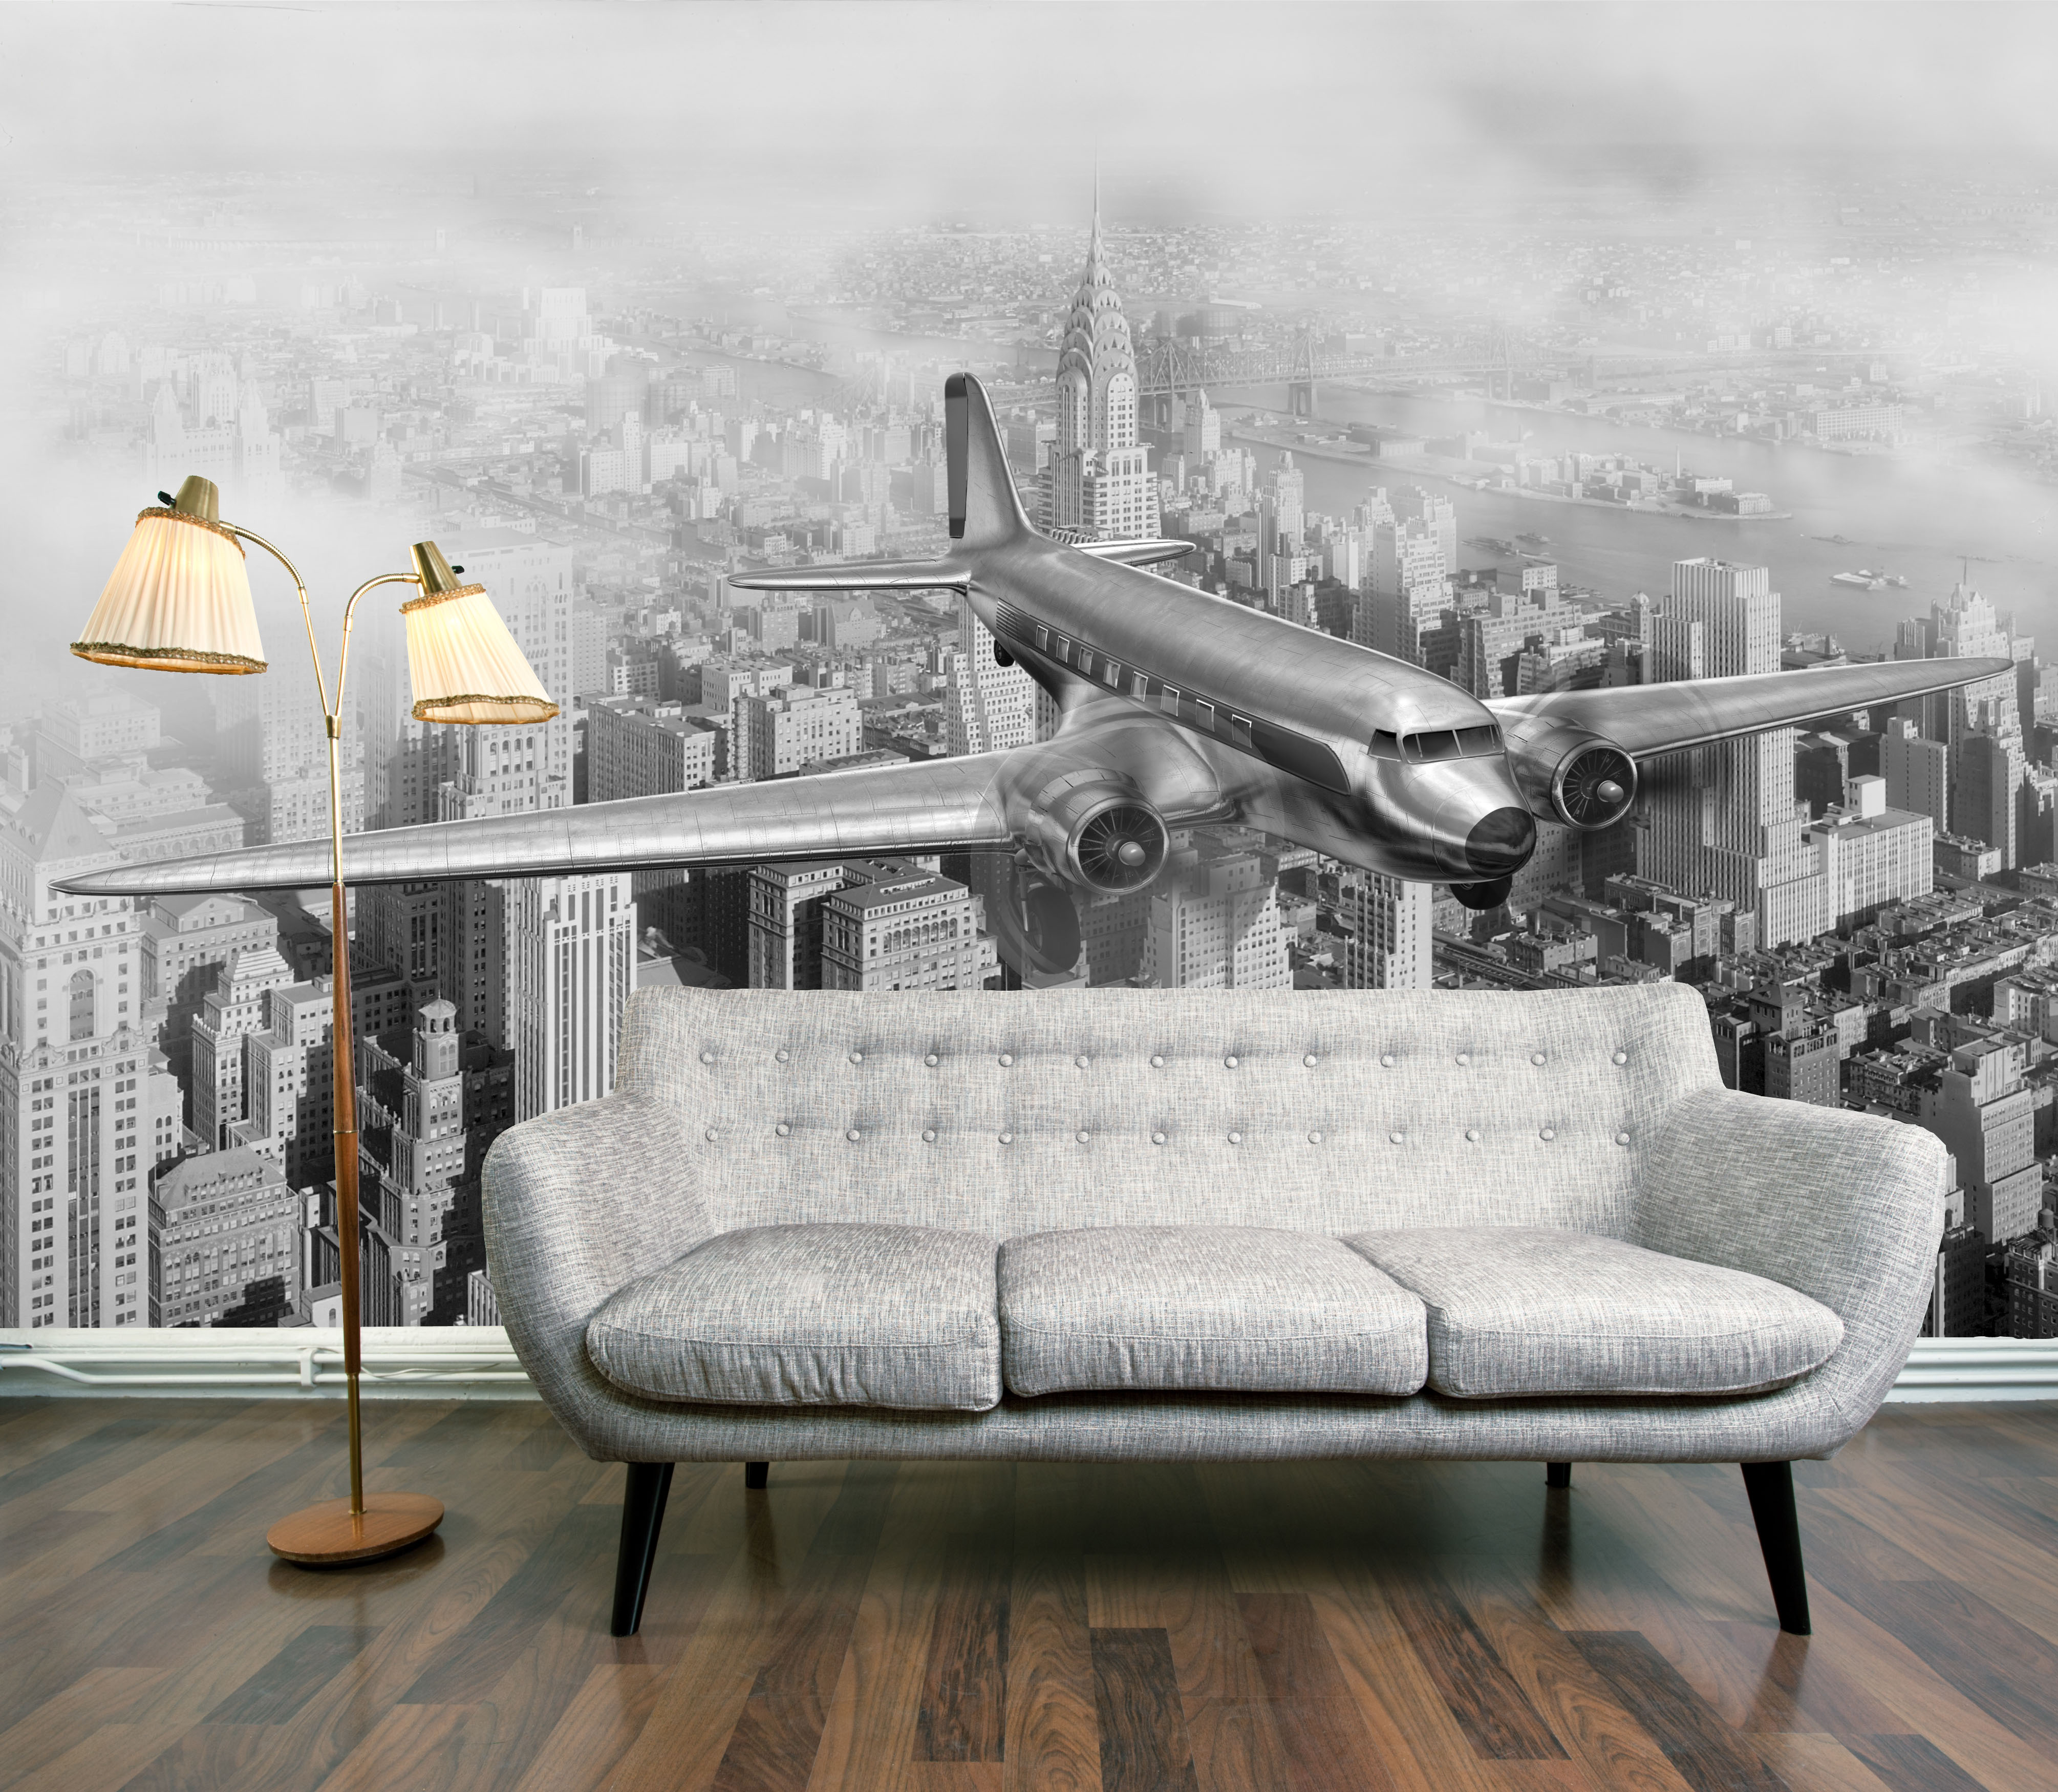 Iconic New York Wallpaper Murals from Digetexhome Posted on